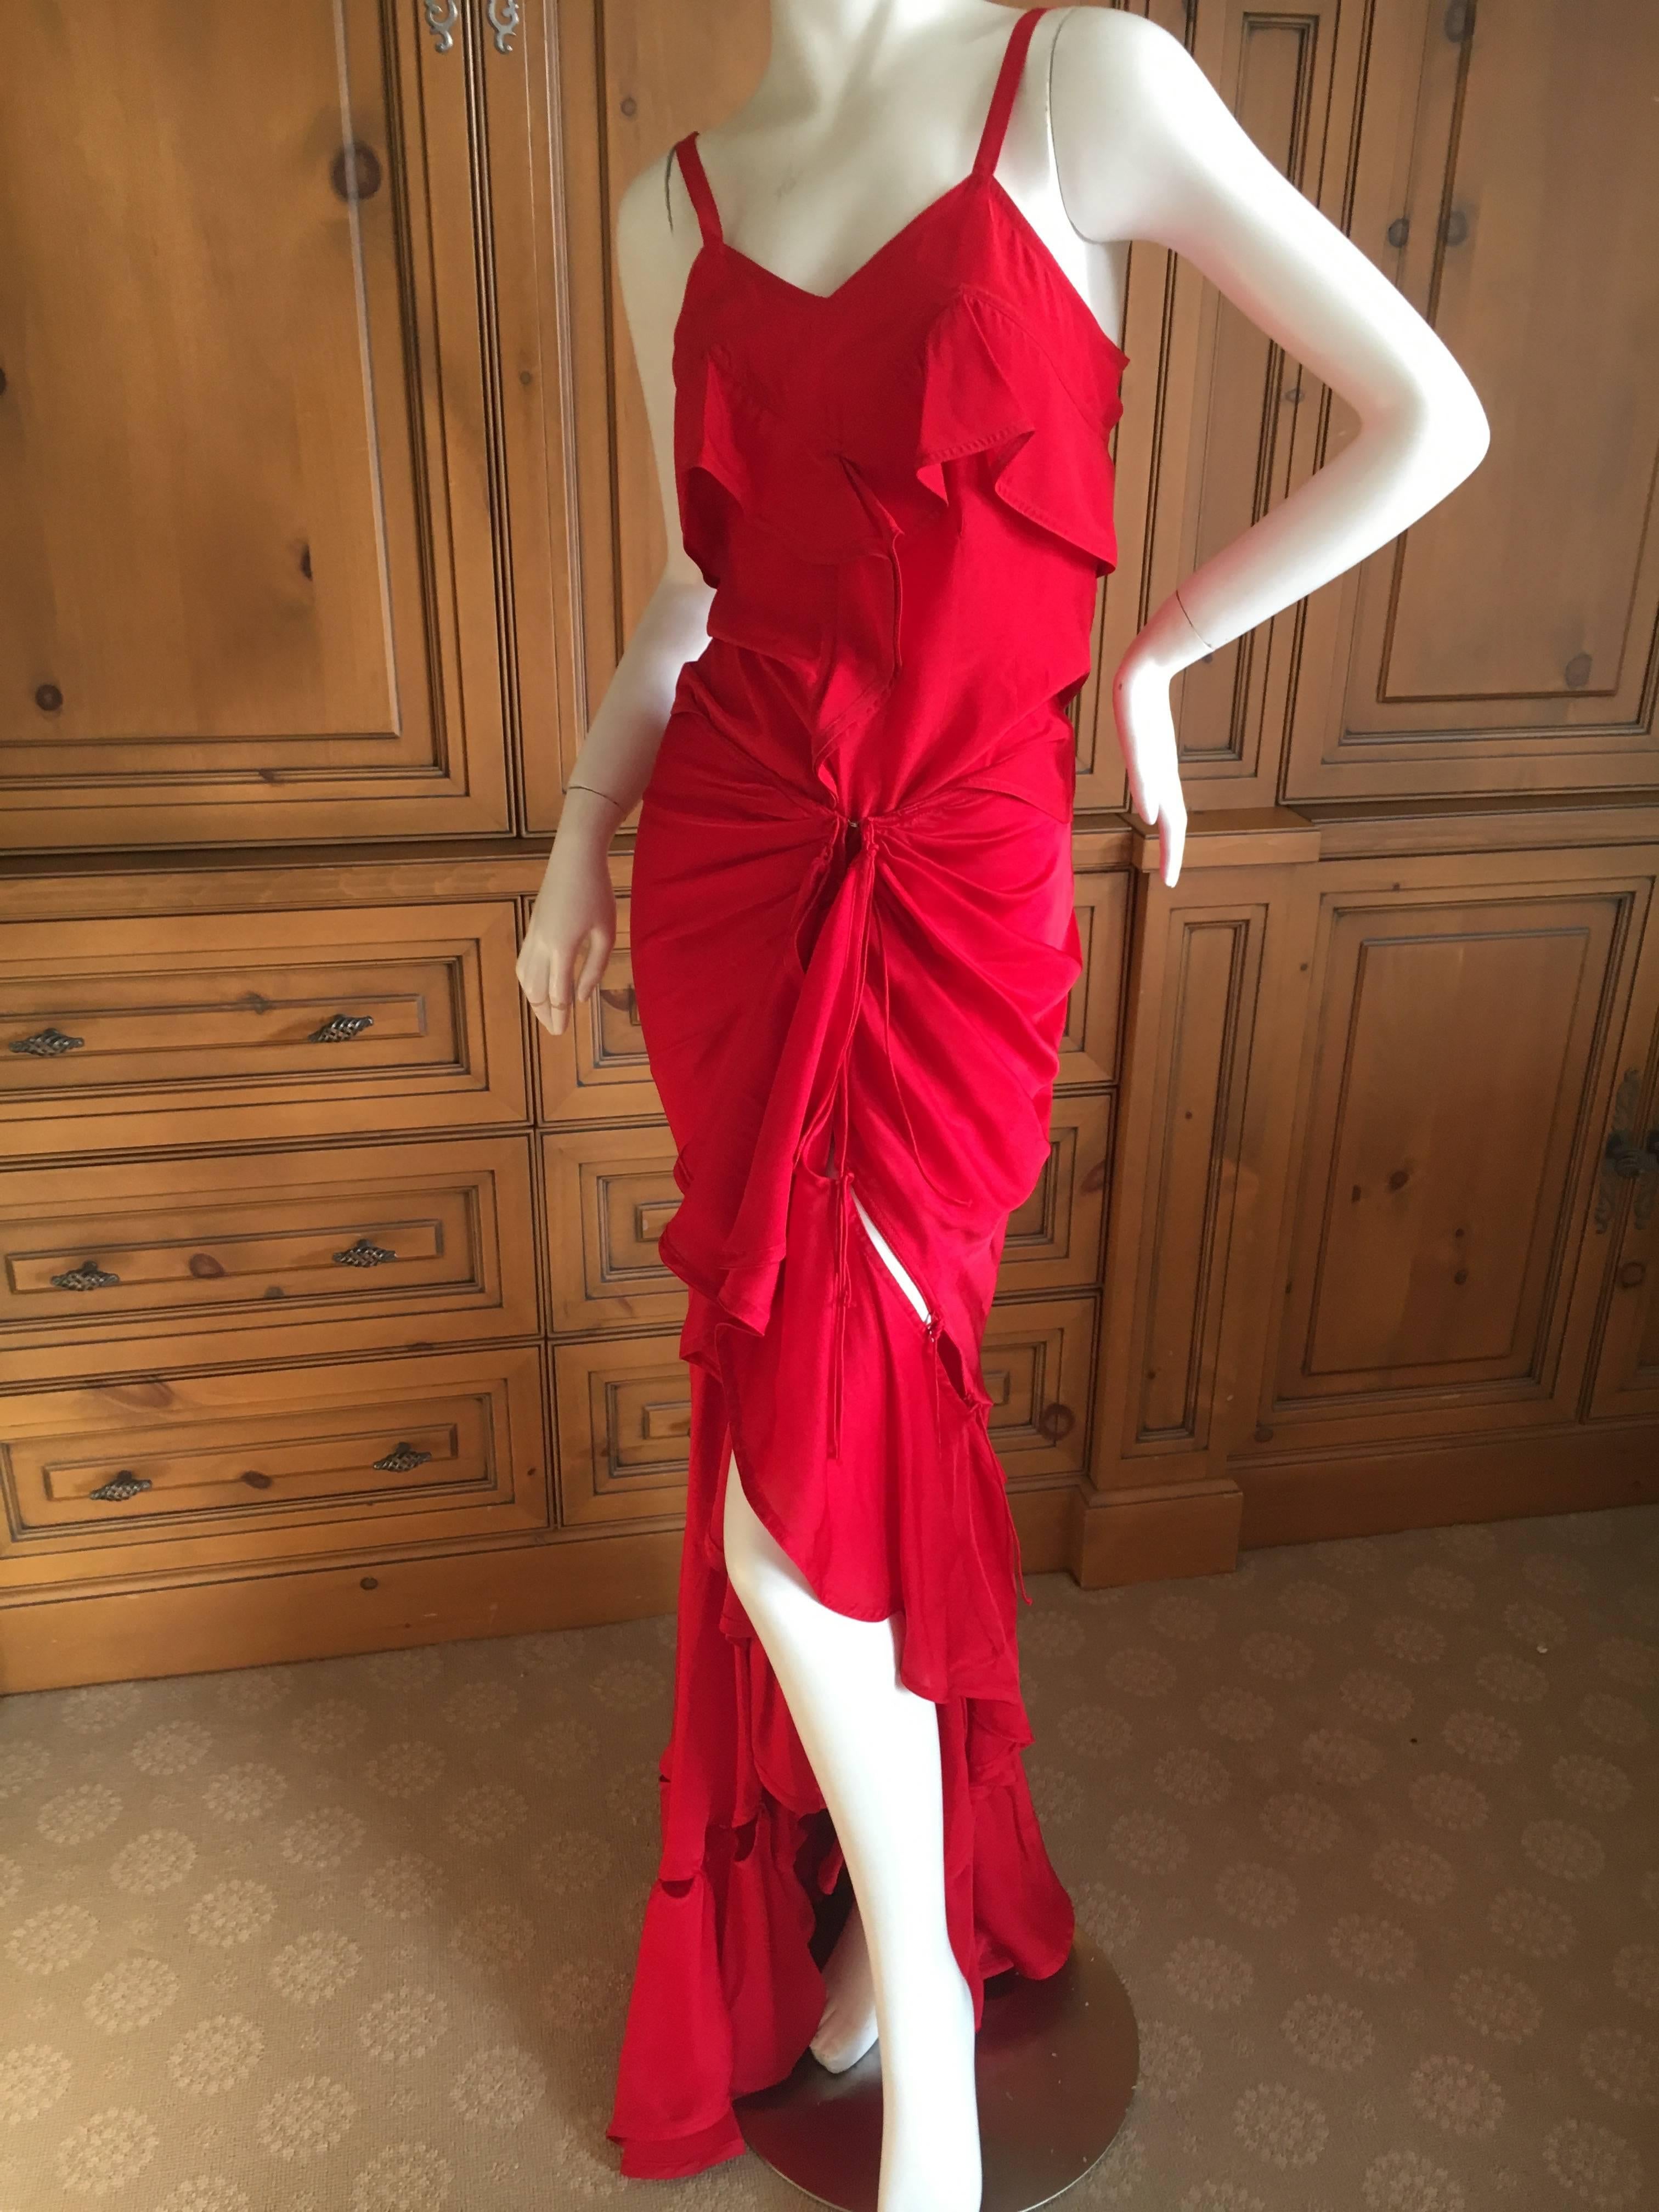 Yves Saint Laurent by Tom Ford Fall 2003 Red Two Piece Evening Dress 2